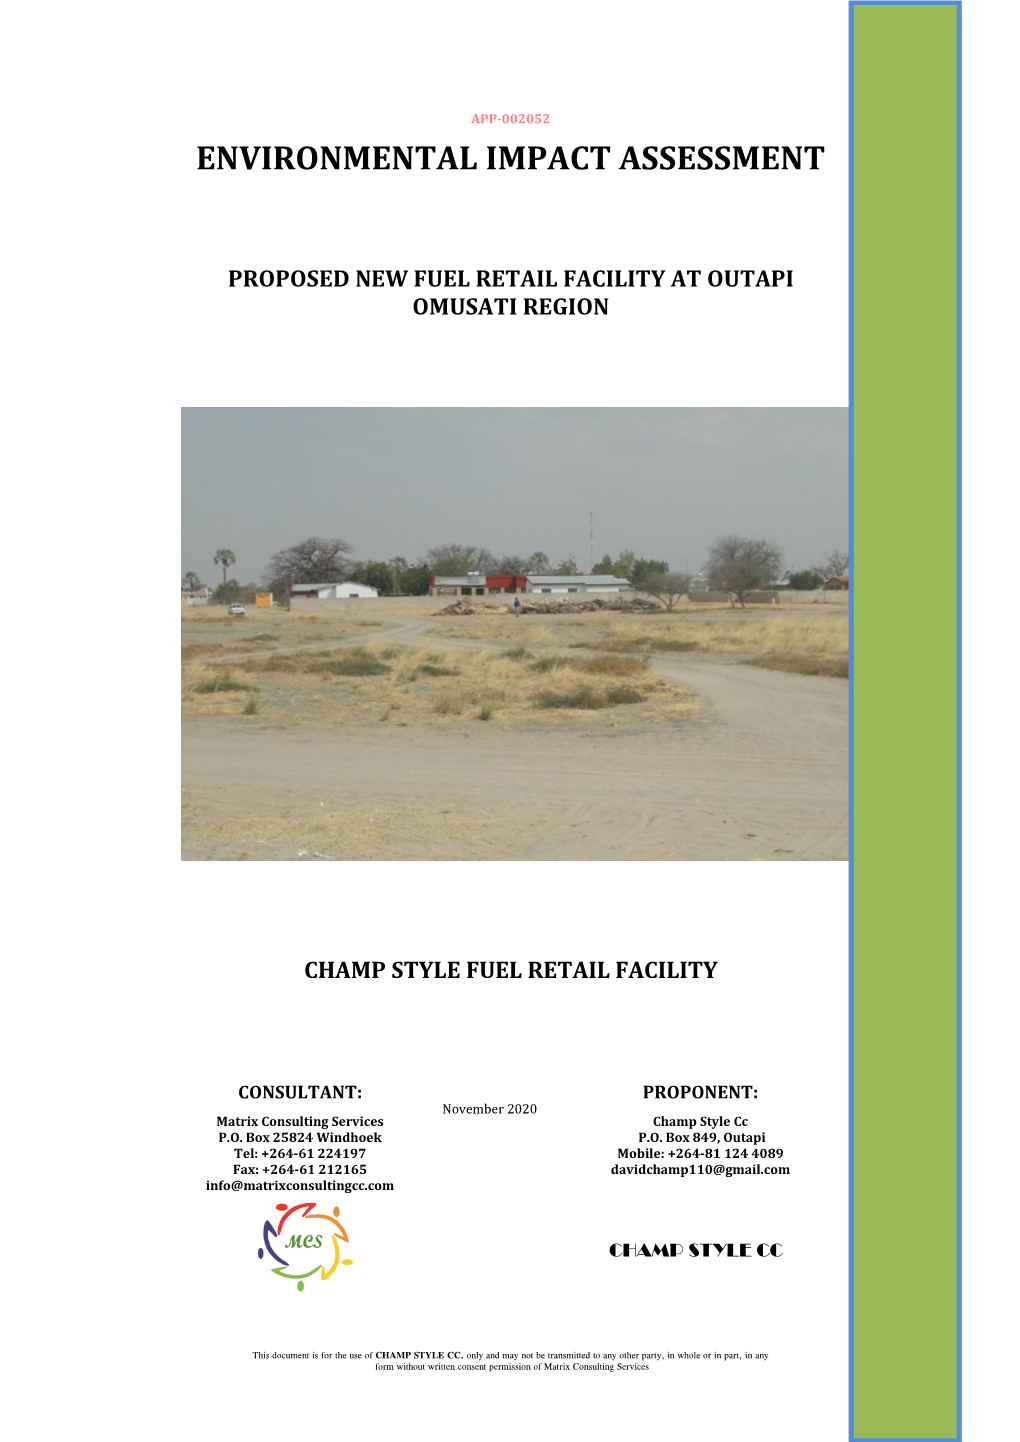 2052 EIA Proposed New Champ Style Fuel Retail Facility in Outapi.Pdf